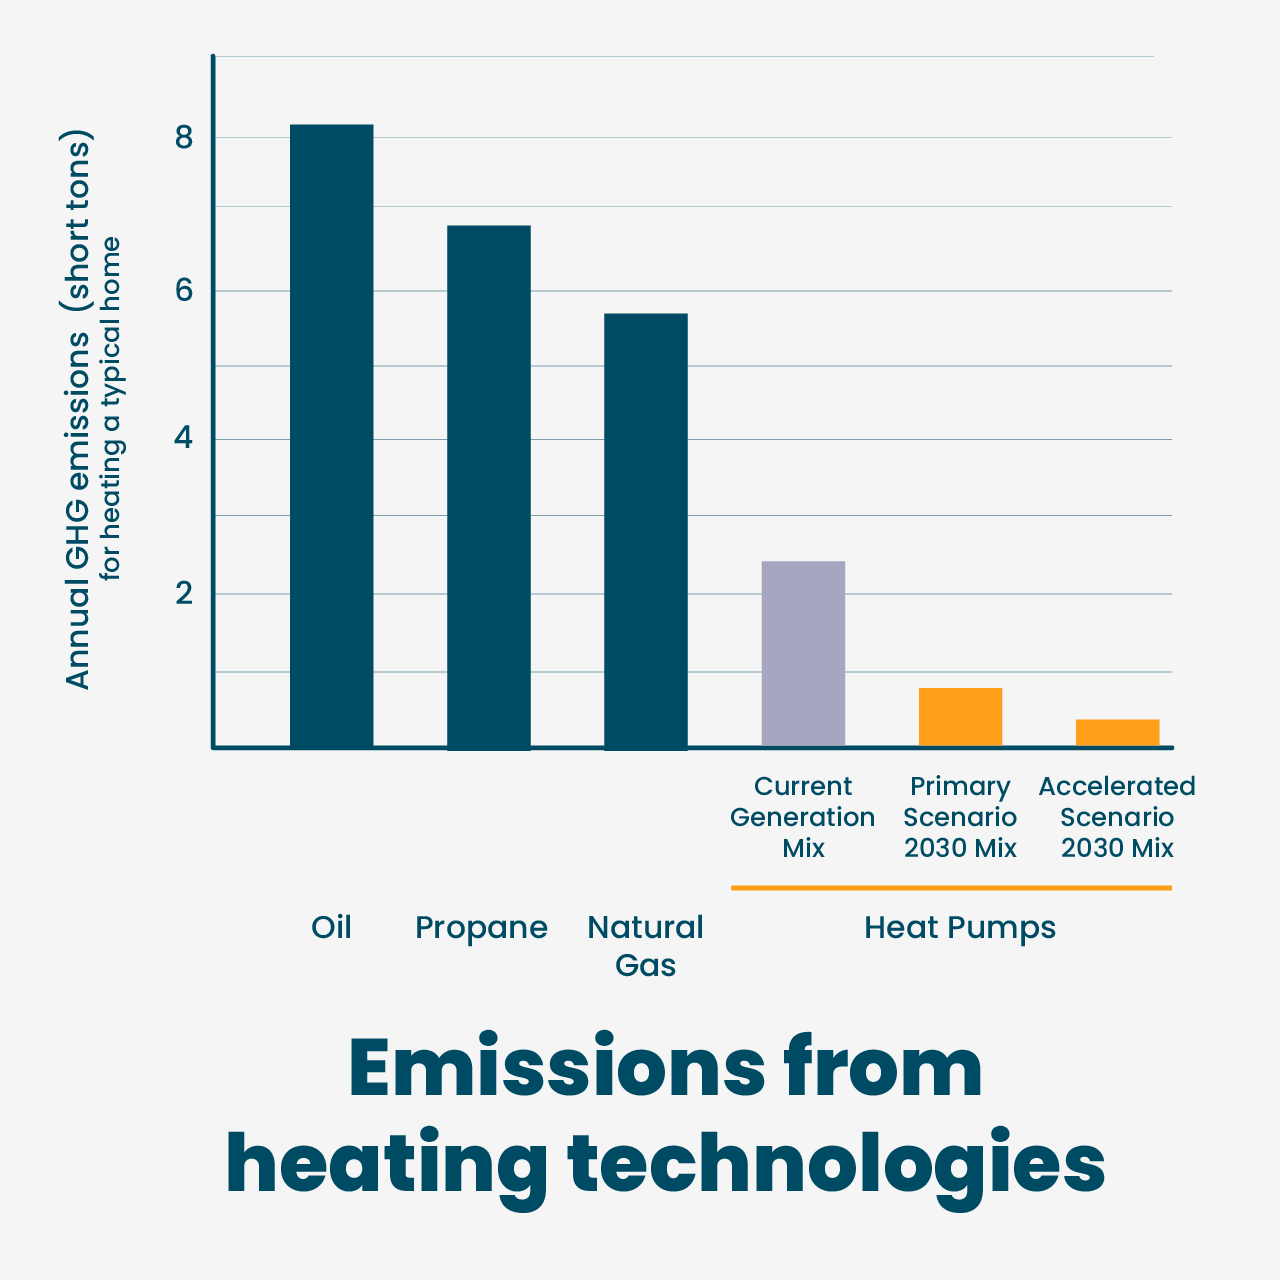 Comparison of emmissions from heating technologies